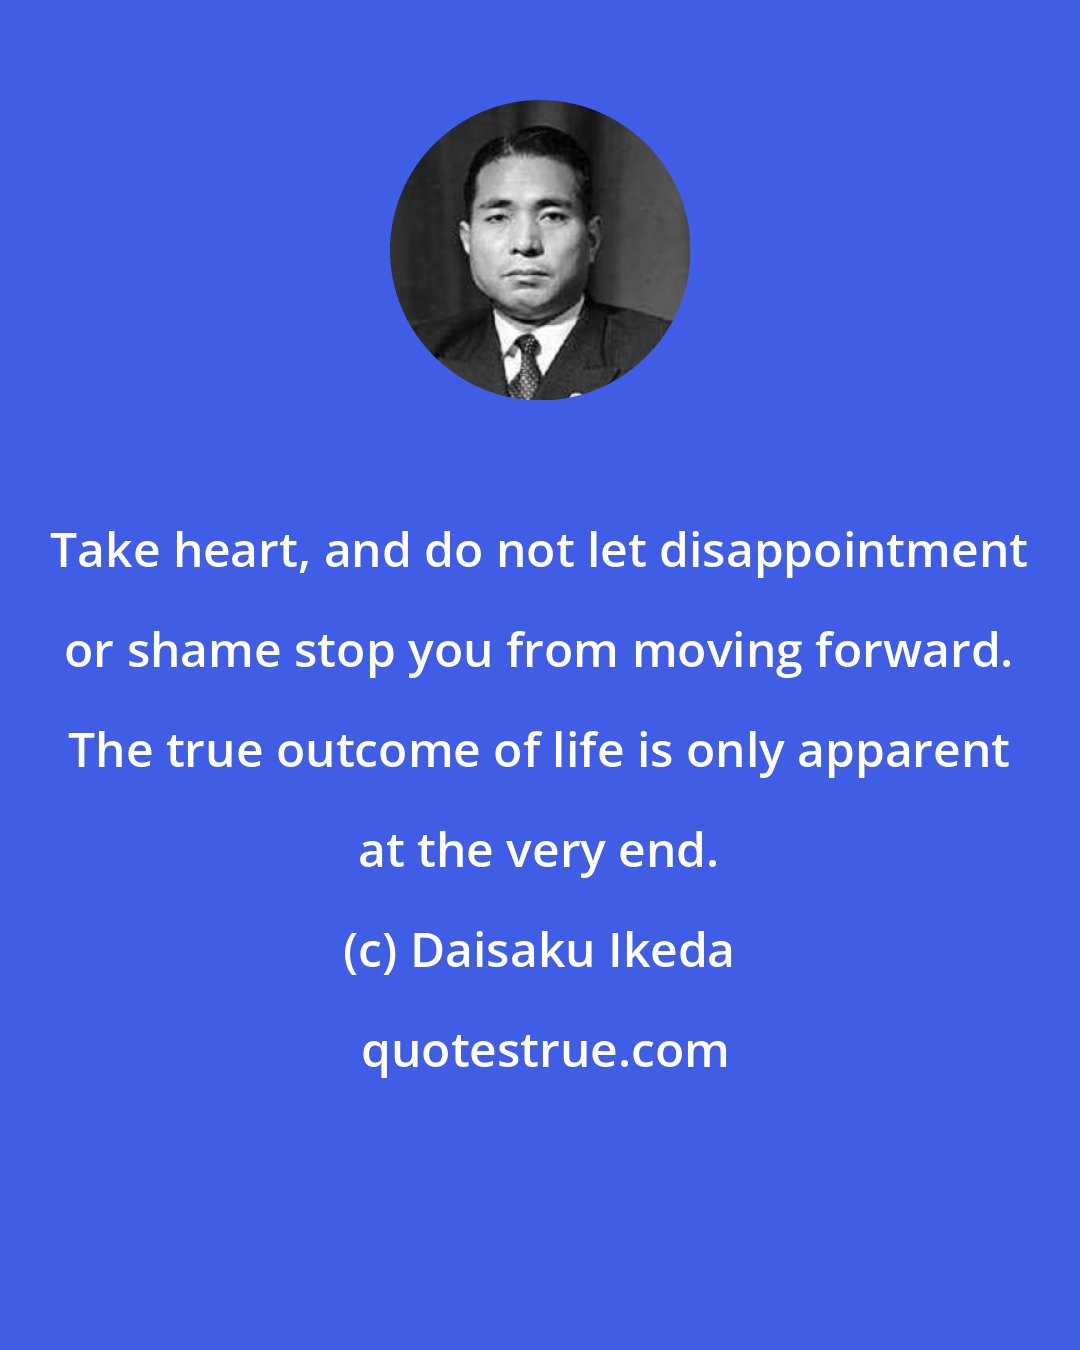 Daisaku Ikeda: Take heart, and do not let disappointment or shame stop you from moving forward. The true outcome of life is only apparent at the very end.